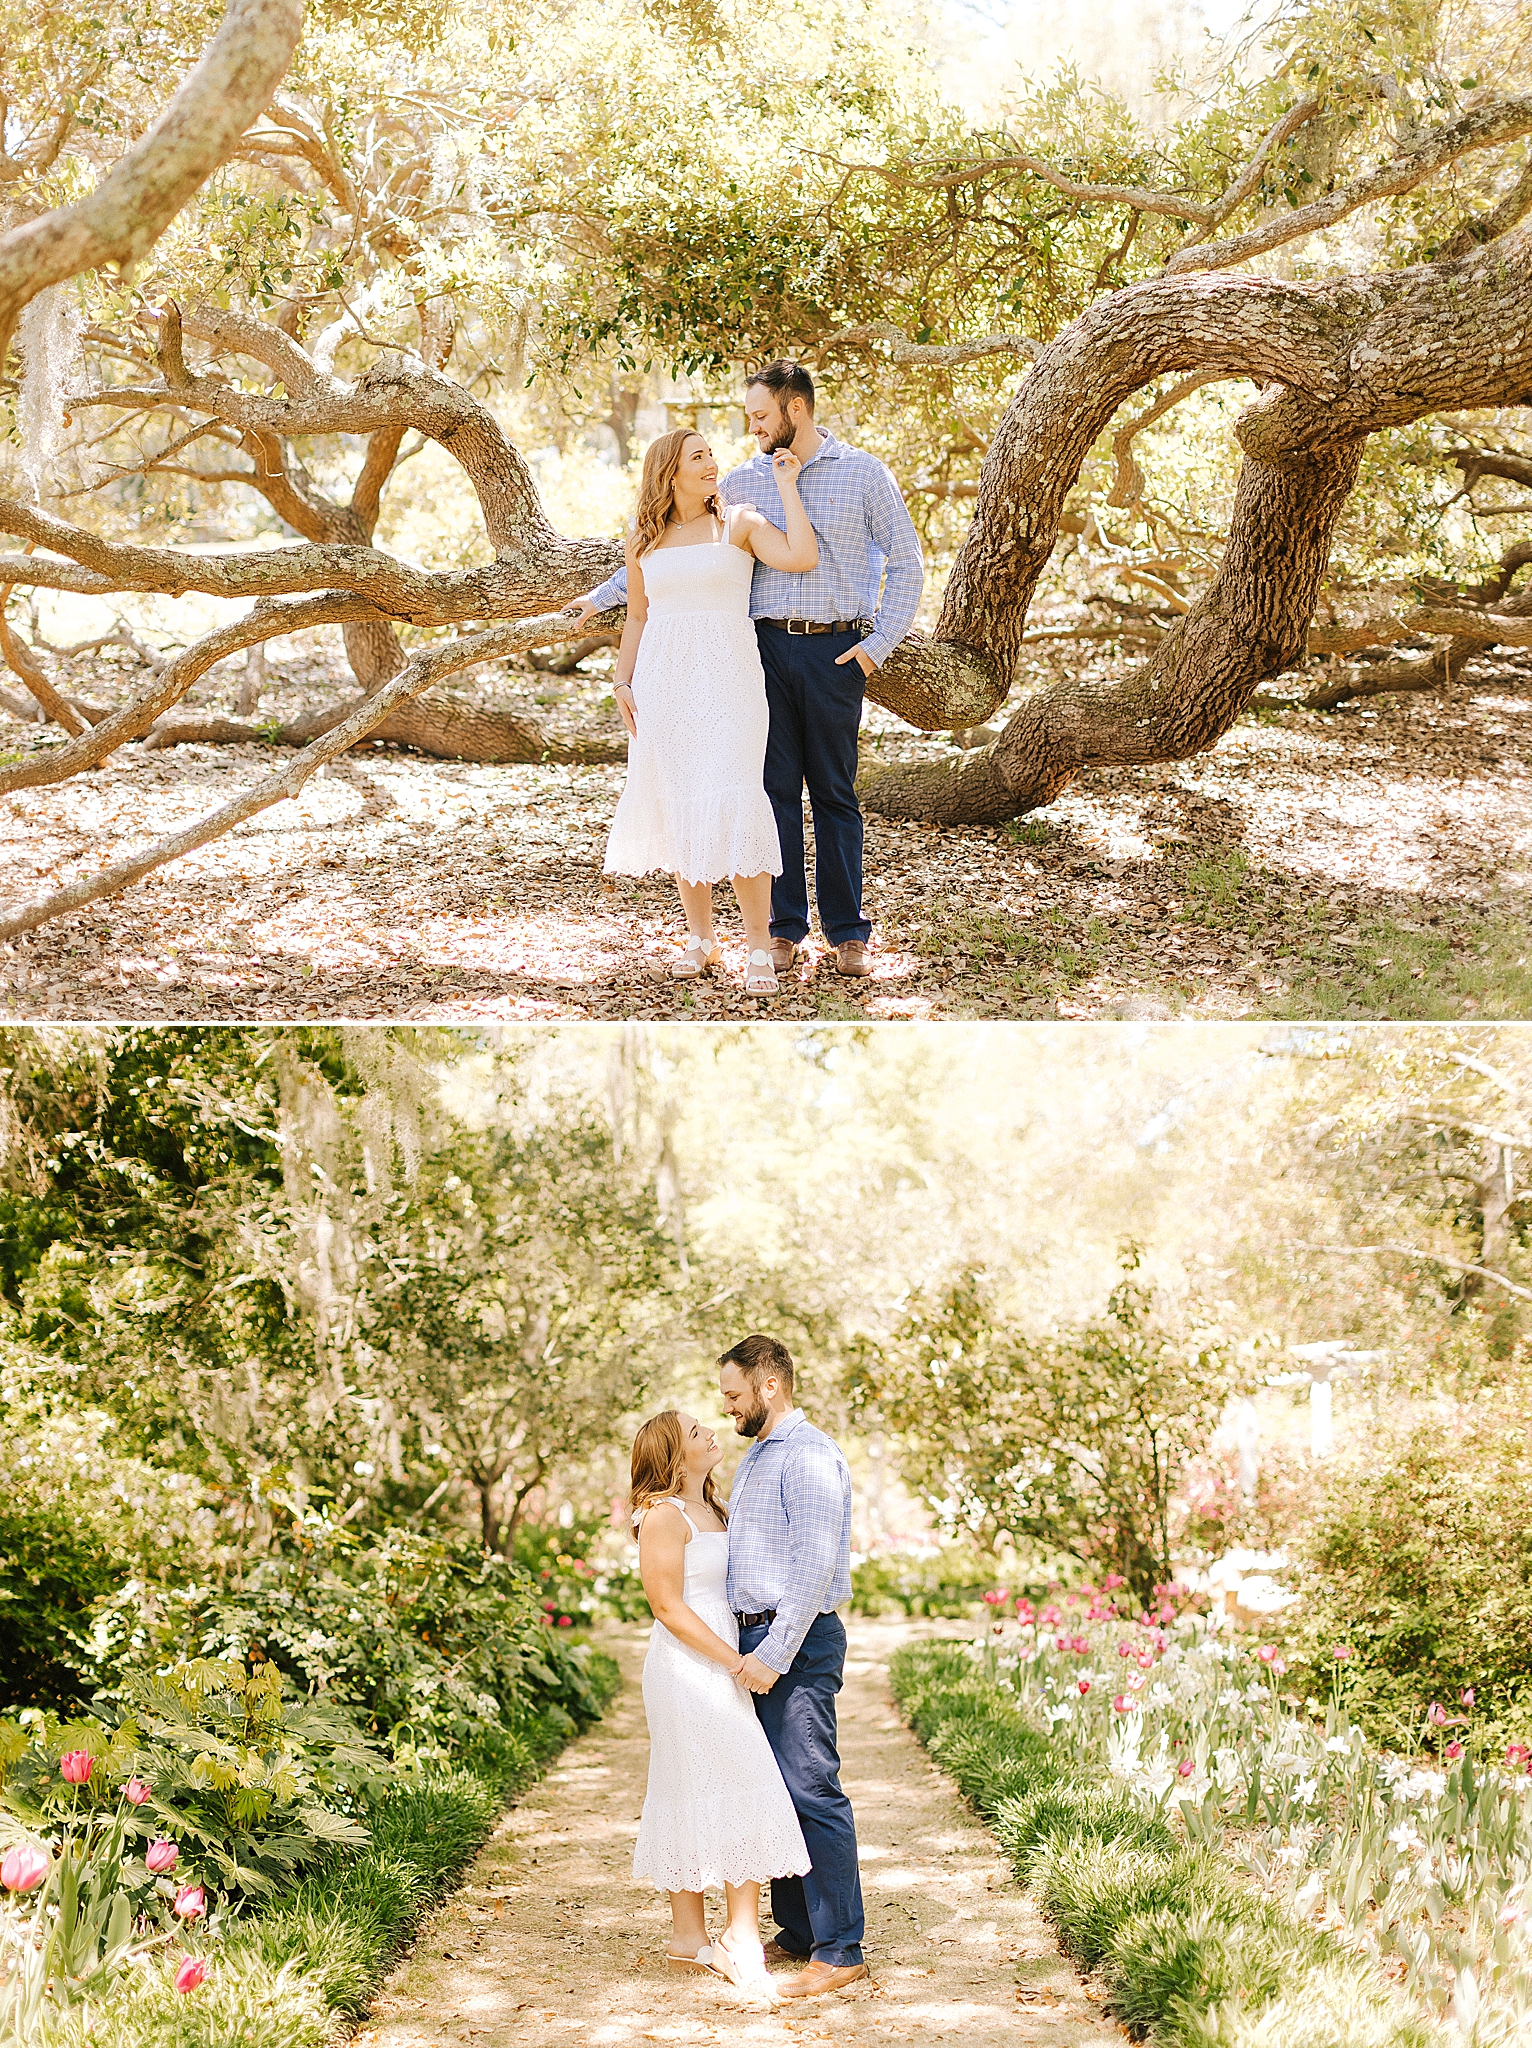 Wilmington engagement session in Airlie Gardens by tree branch